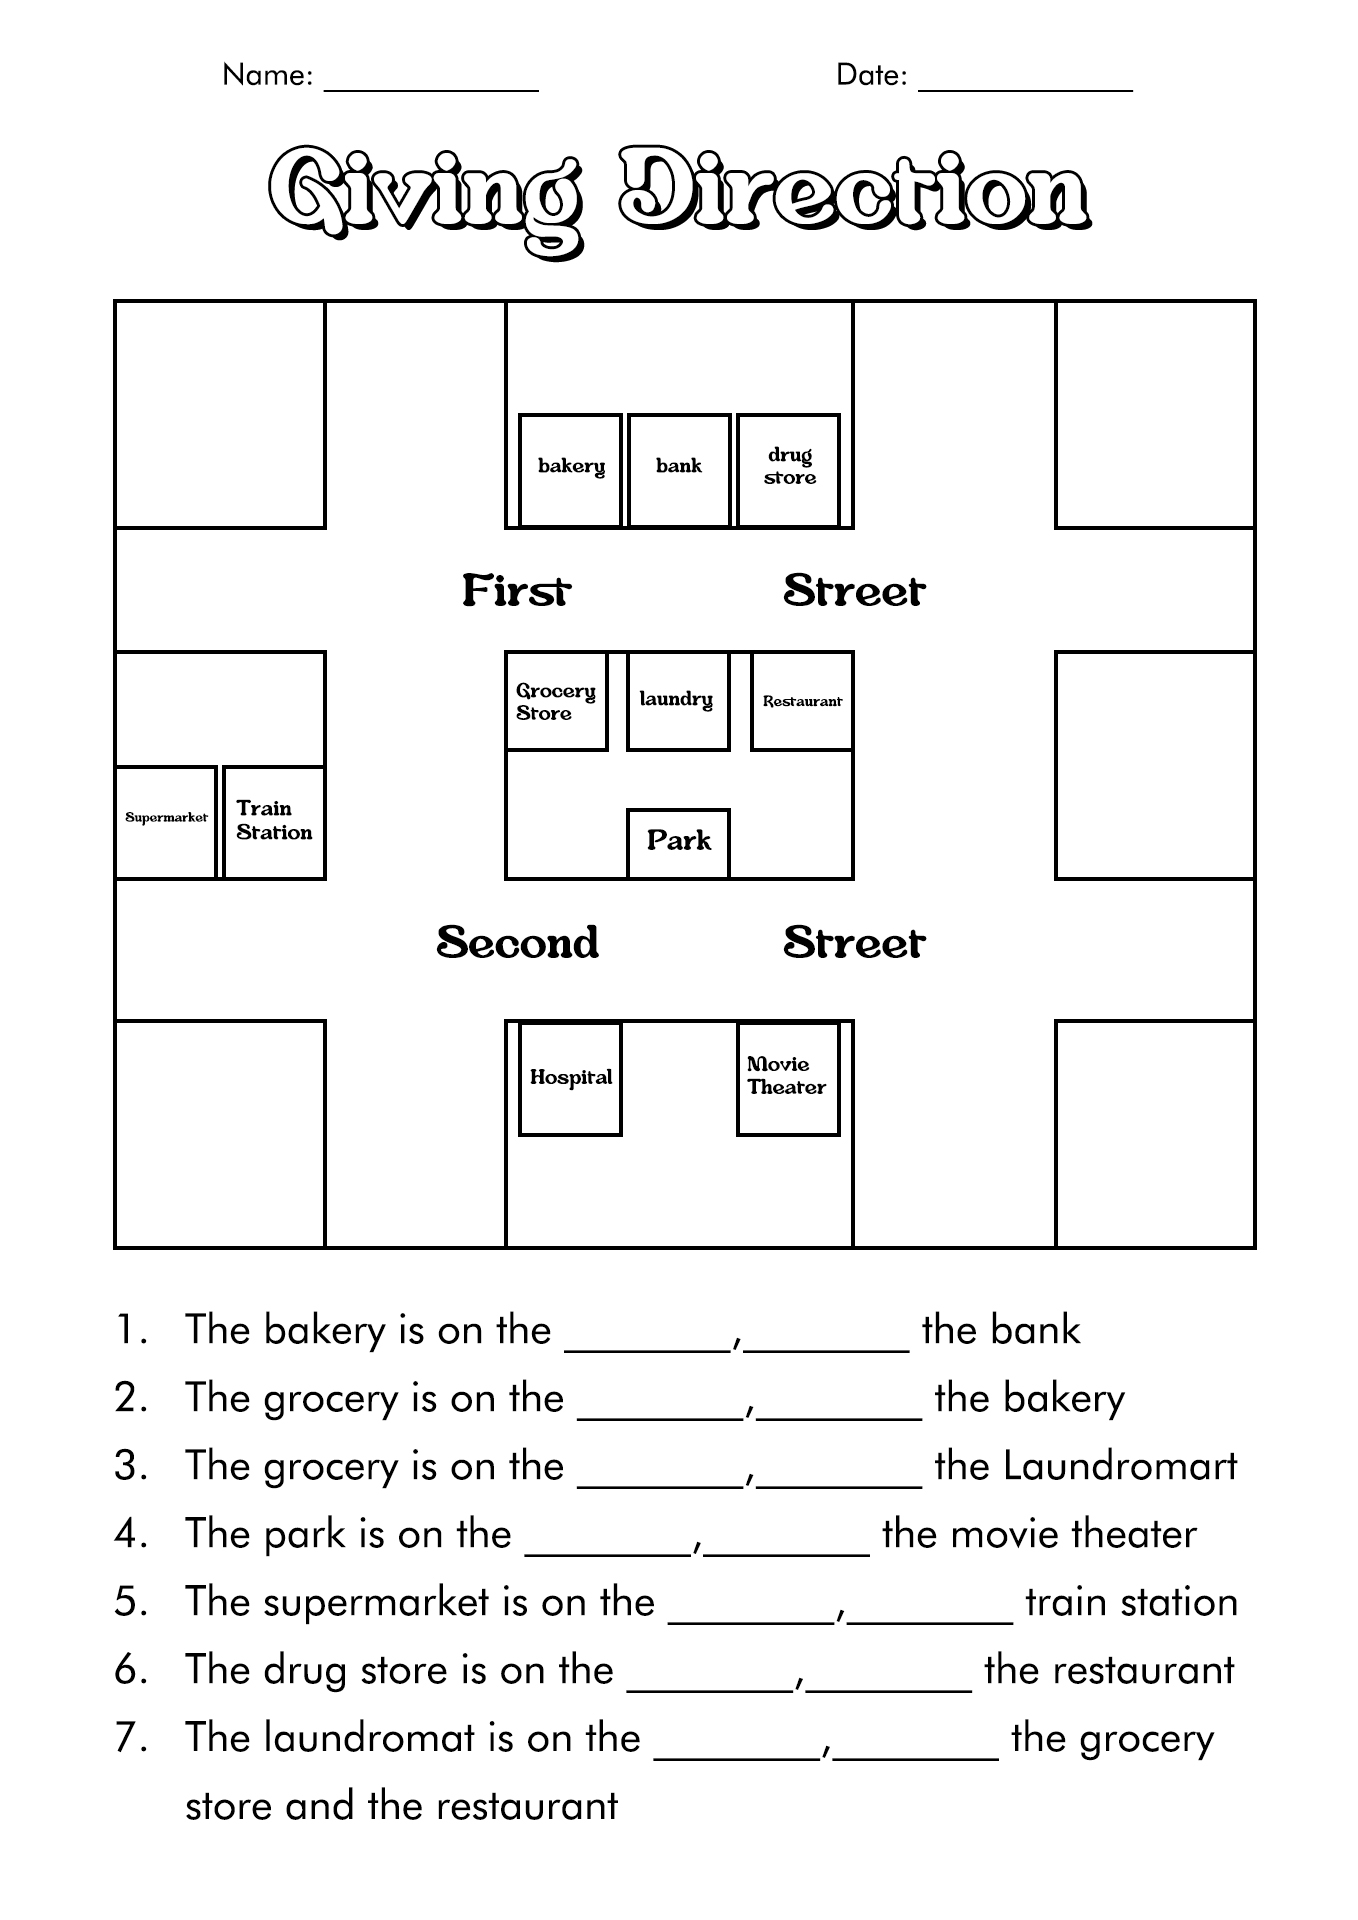 free-following-directions-worksheets-pdf-free-download-gmbar-co